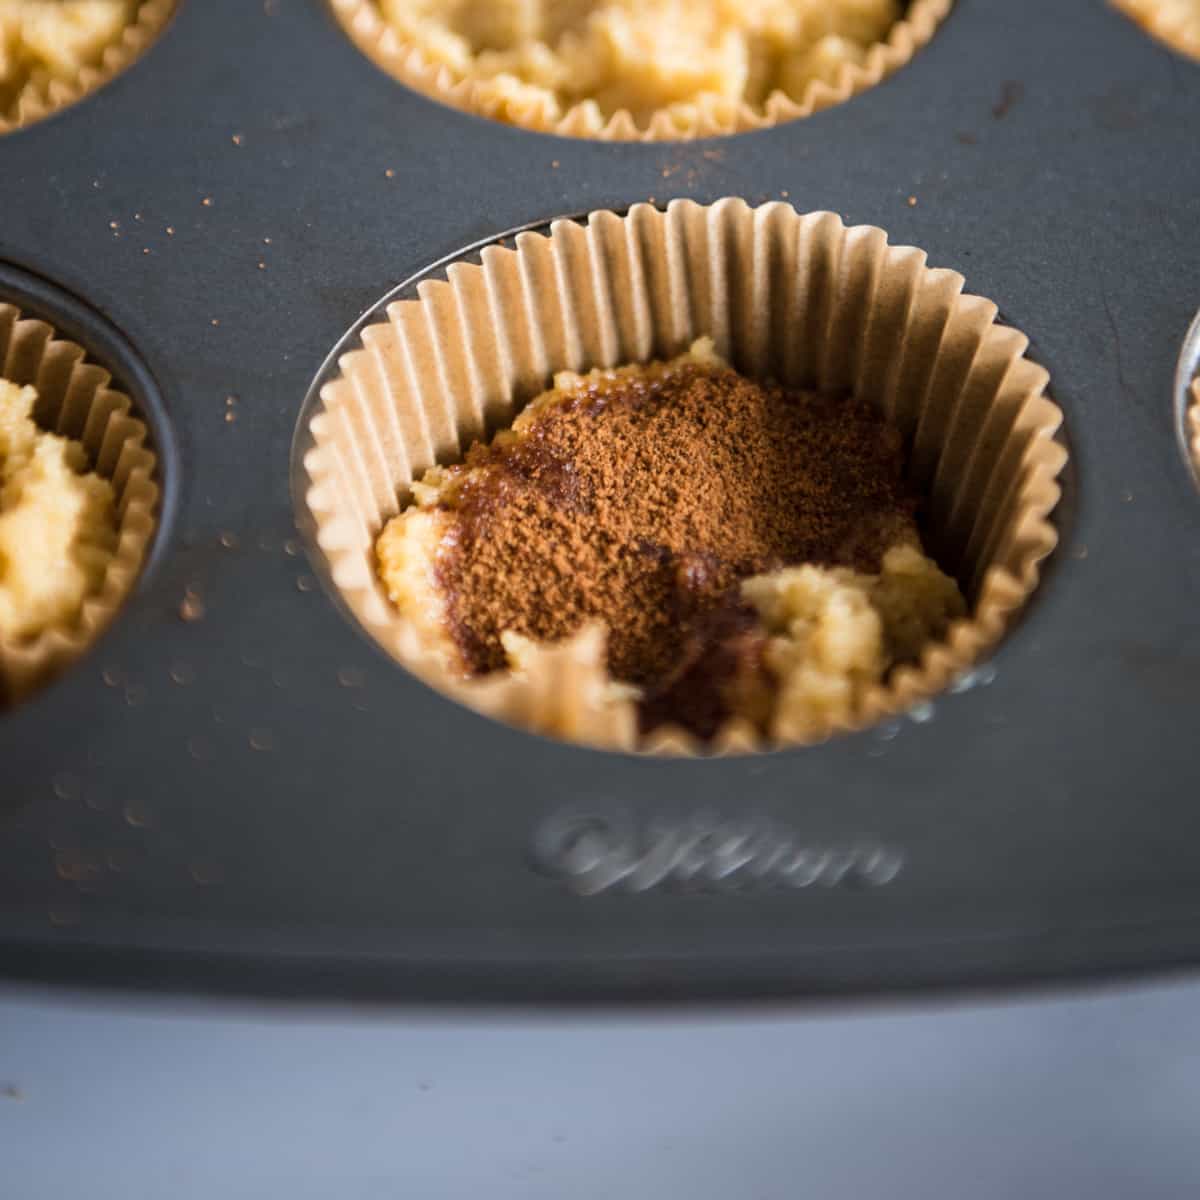 Muffin tin with cinnamon sugar sprinkled on top of muffin batter